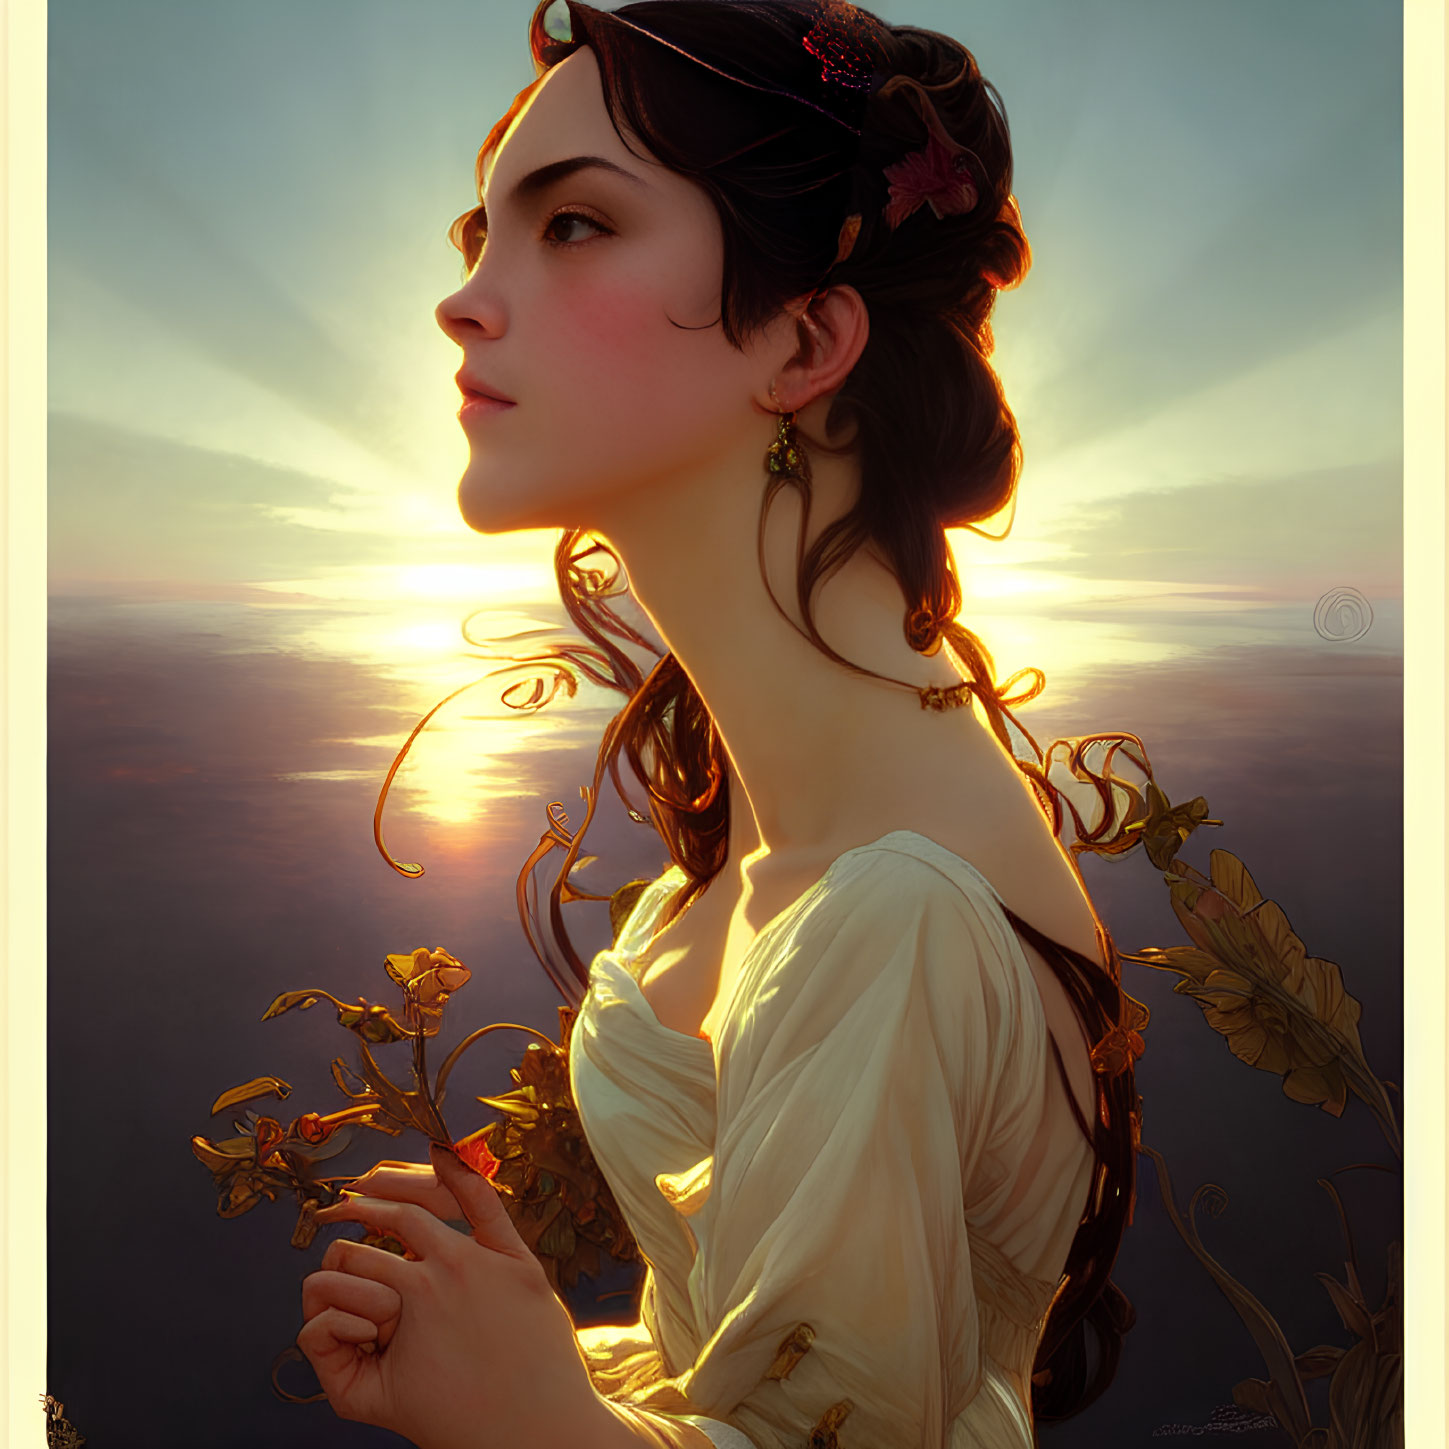 Digital artwork: Woman profile with hair accessories in golden sunset backdrop